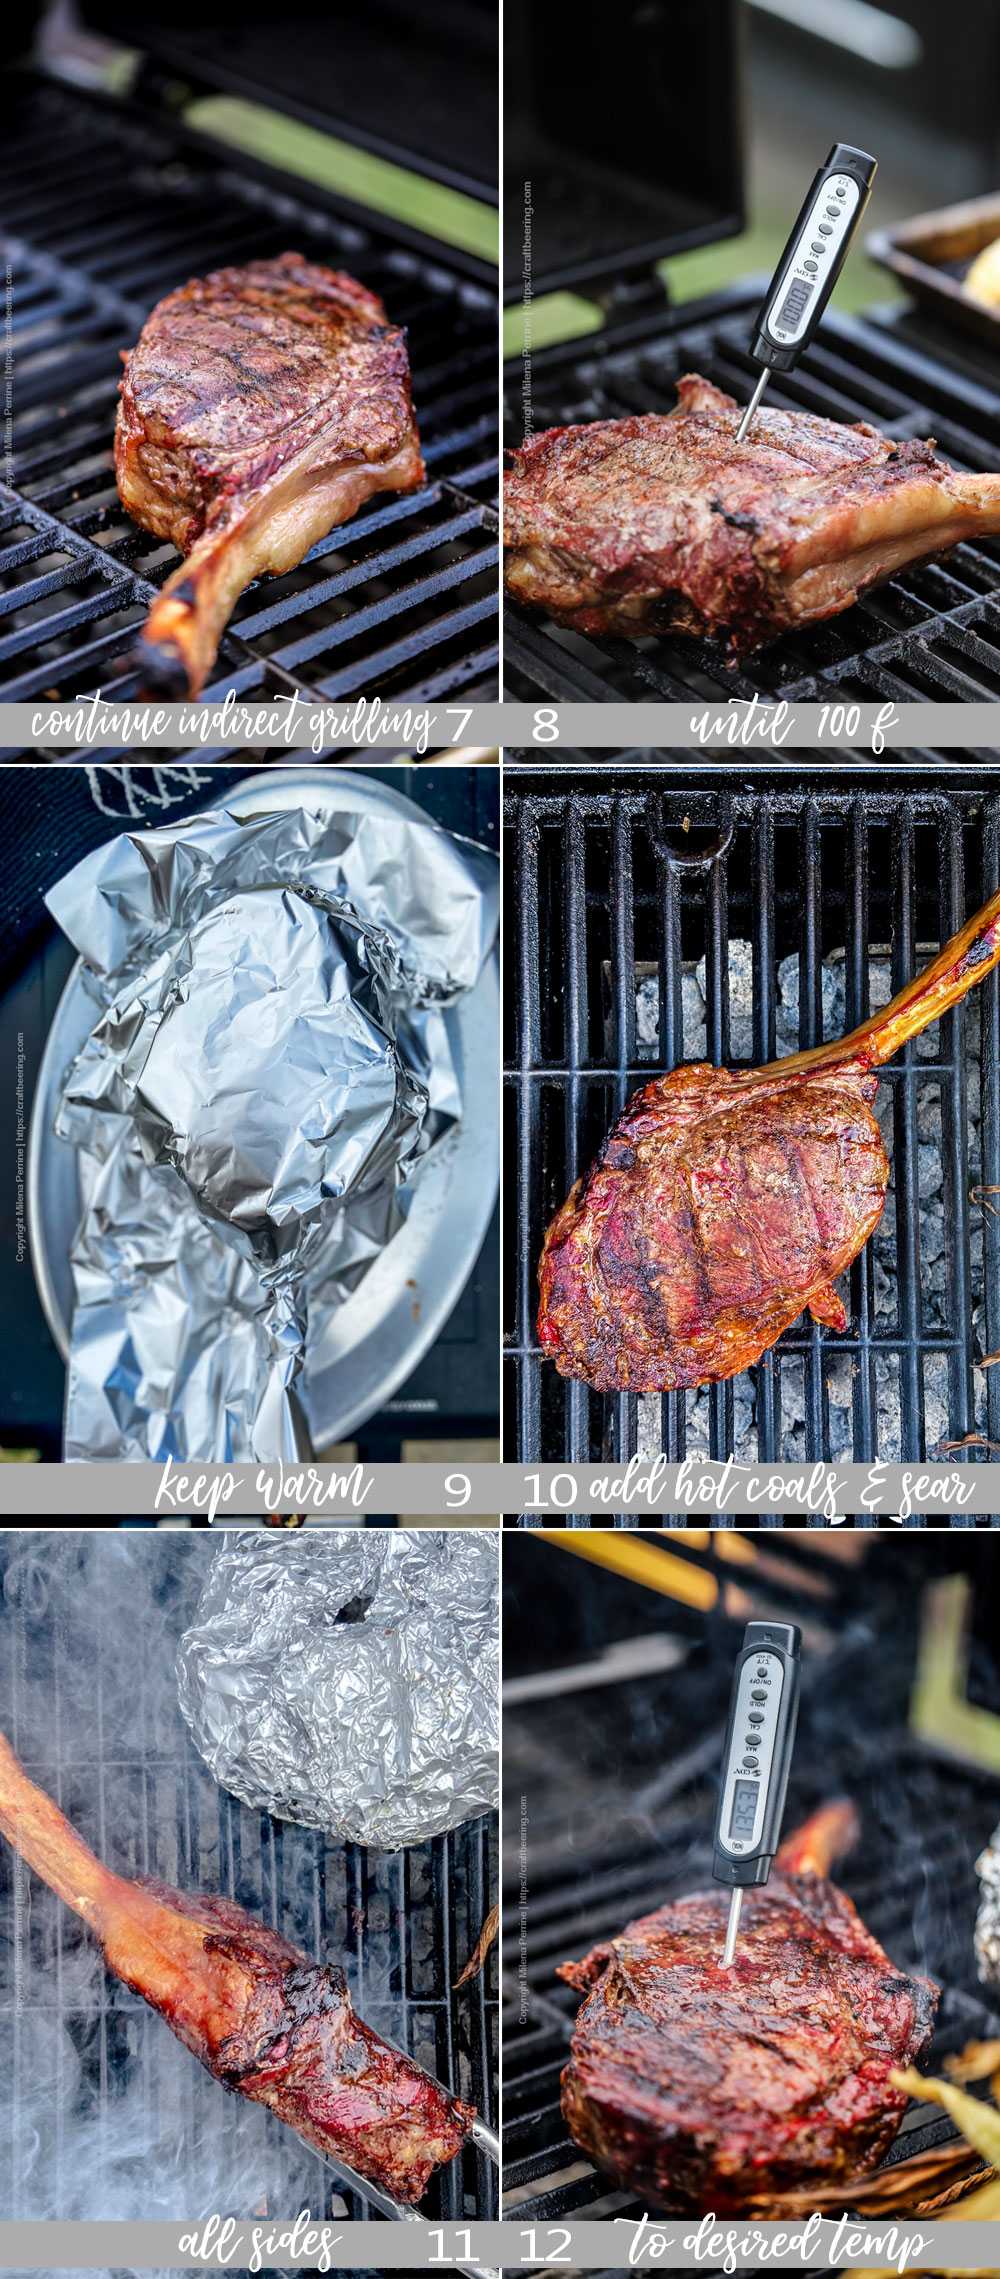 Indirect grilling of Tomahawk steak on charcoal grill.